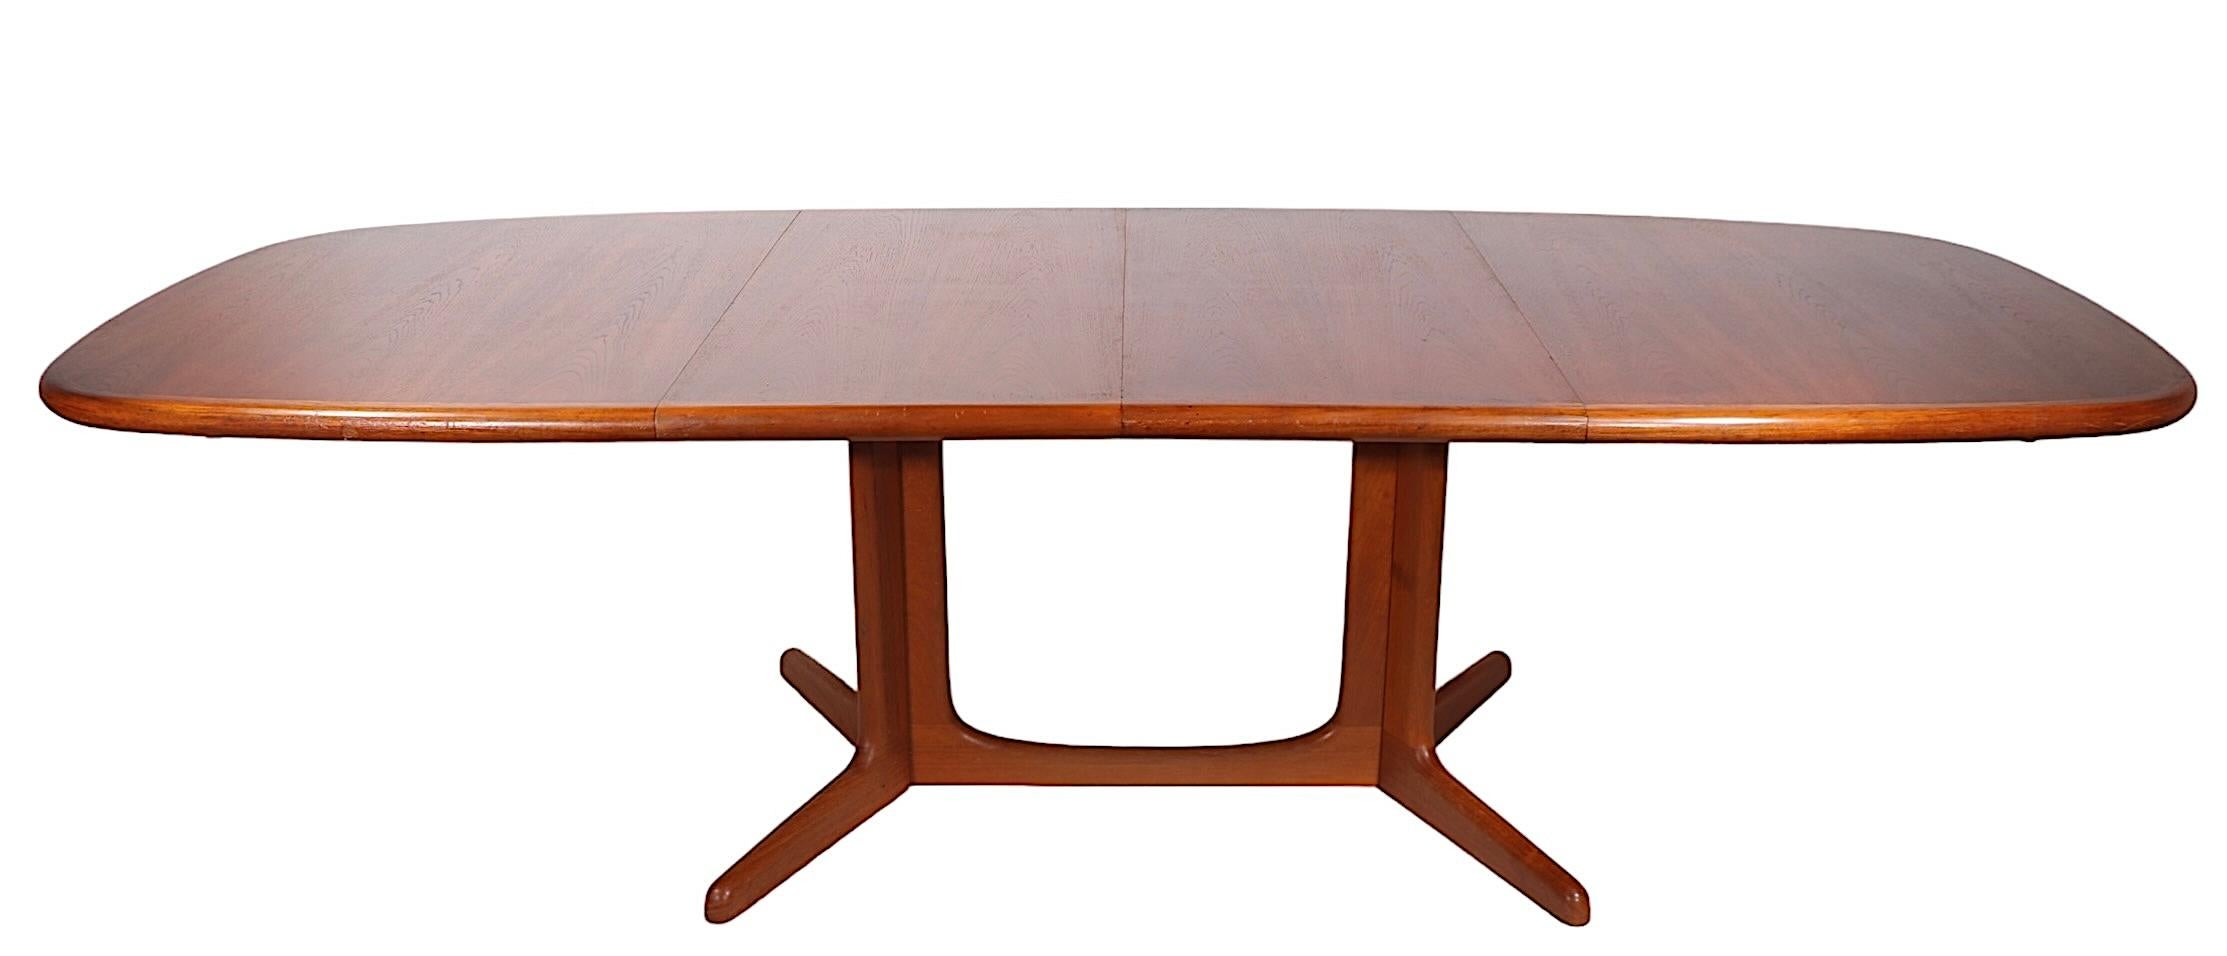 Danish Mid Century Oval Teak Dining Table by Niels Otto Moller for Gudme c 1970s For Sale 11